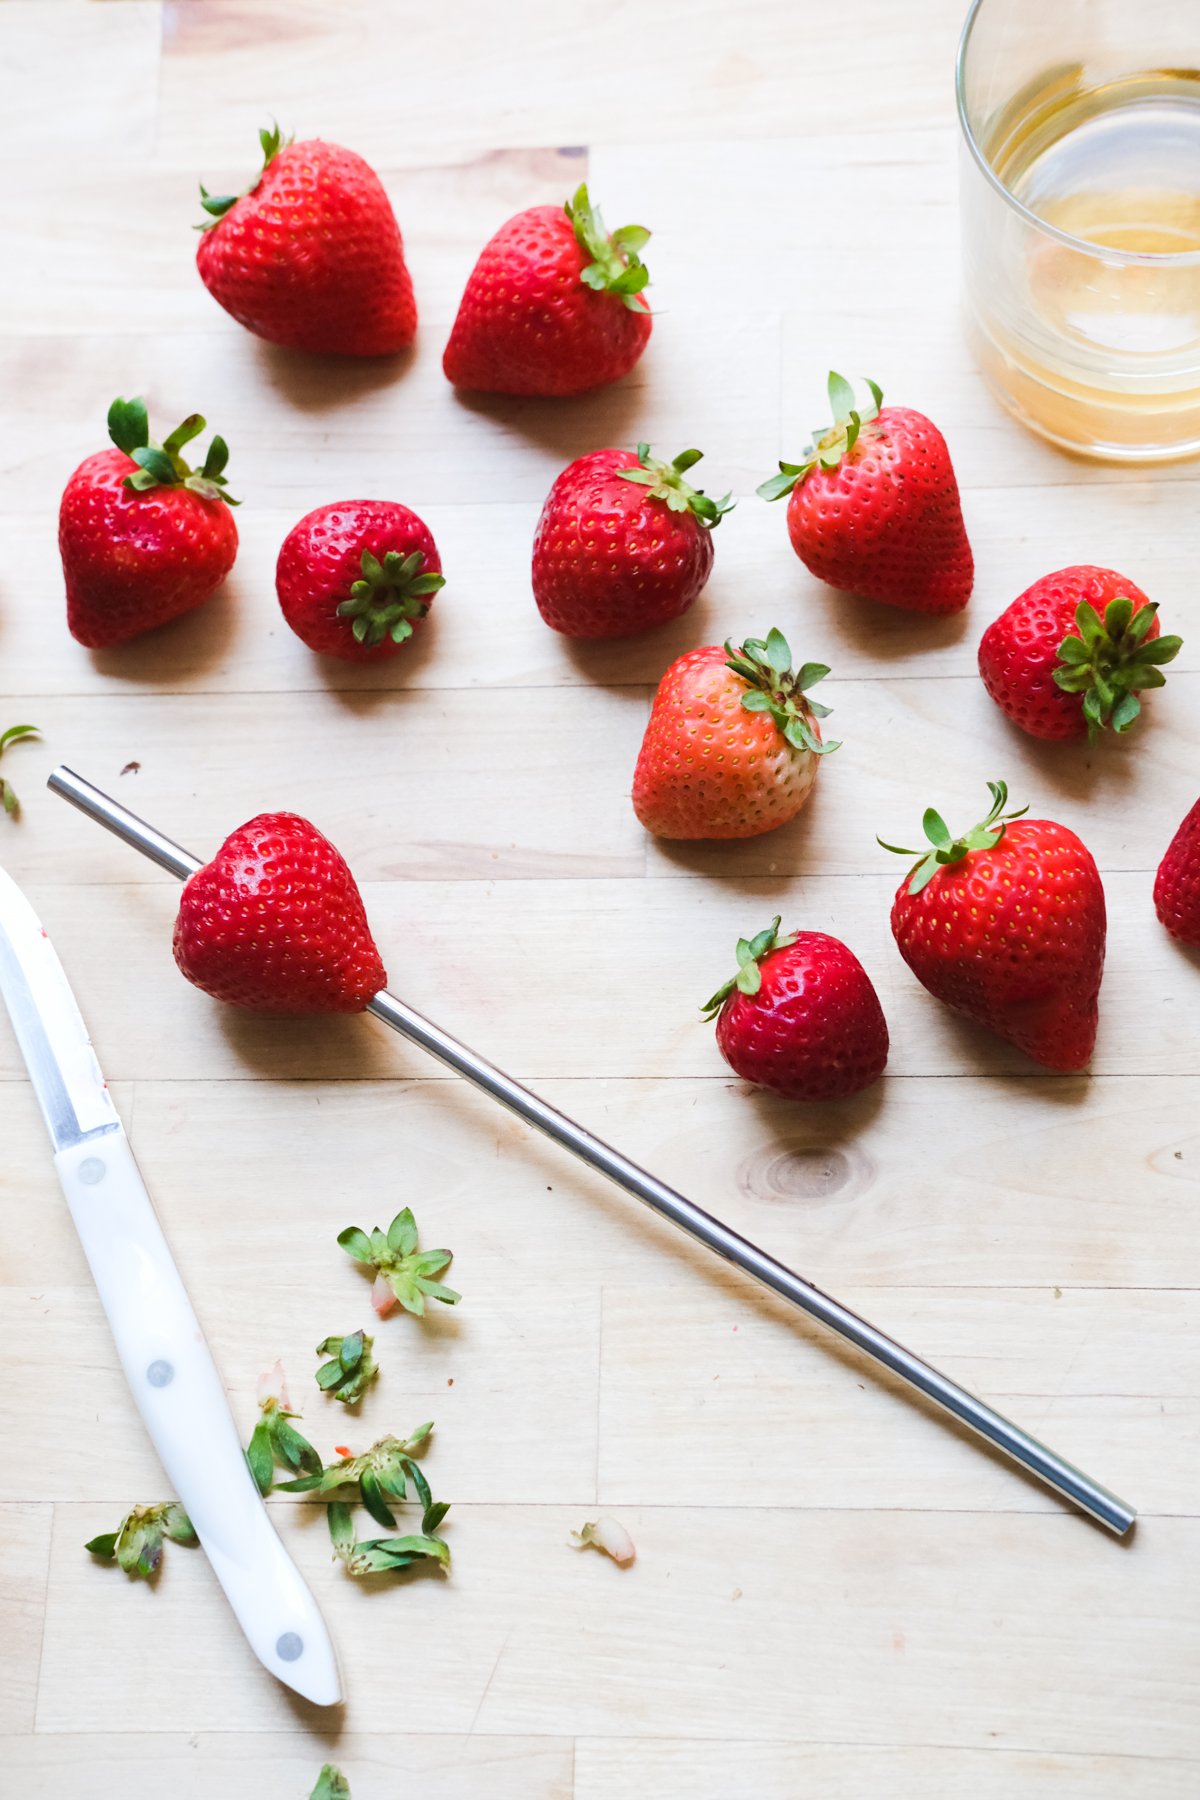 hulling strawberries with a straw